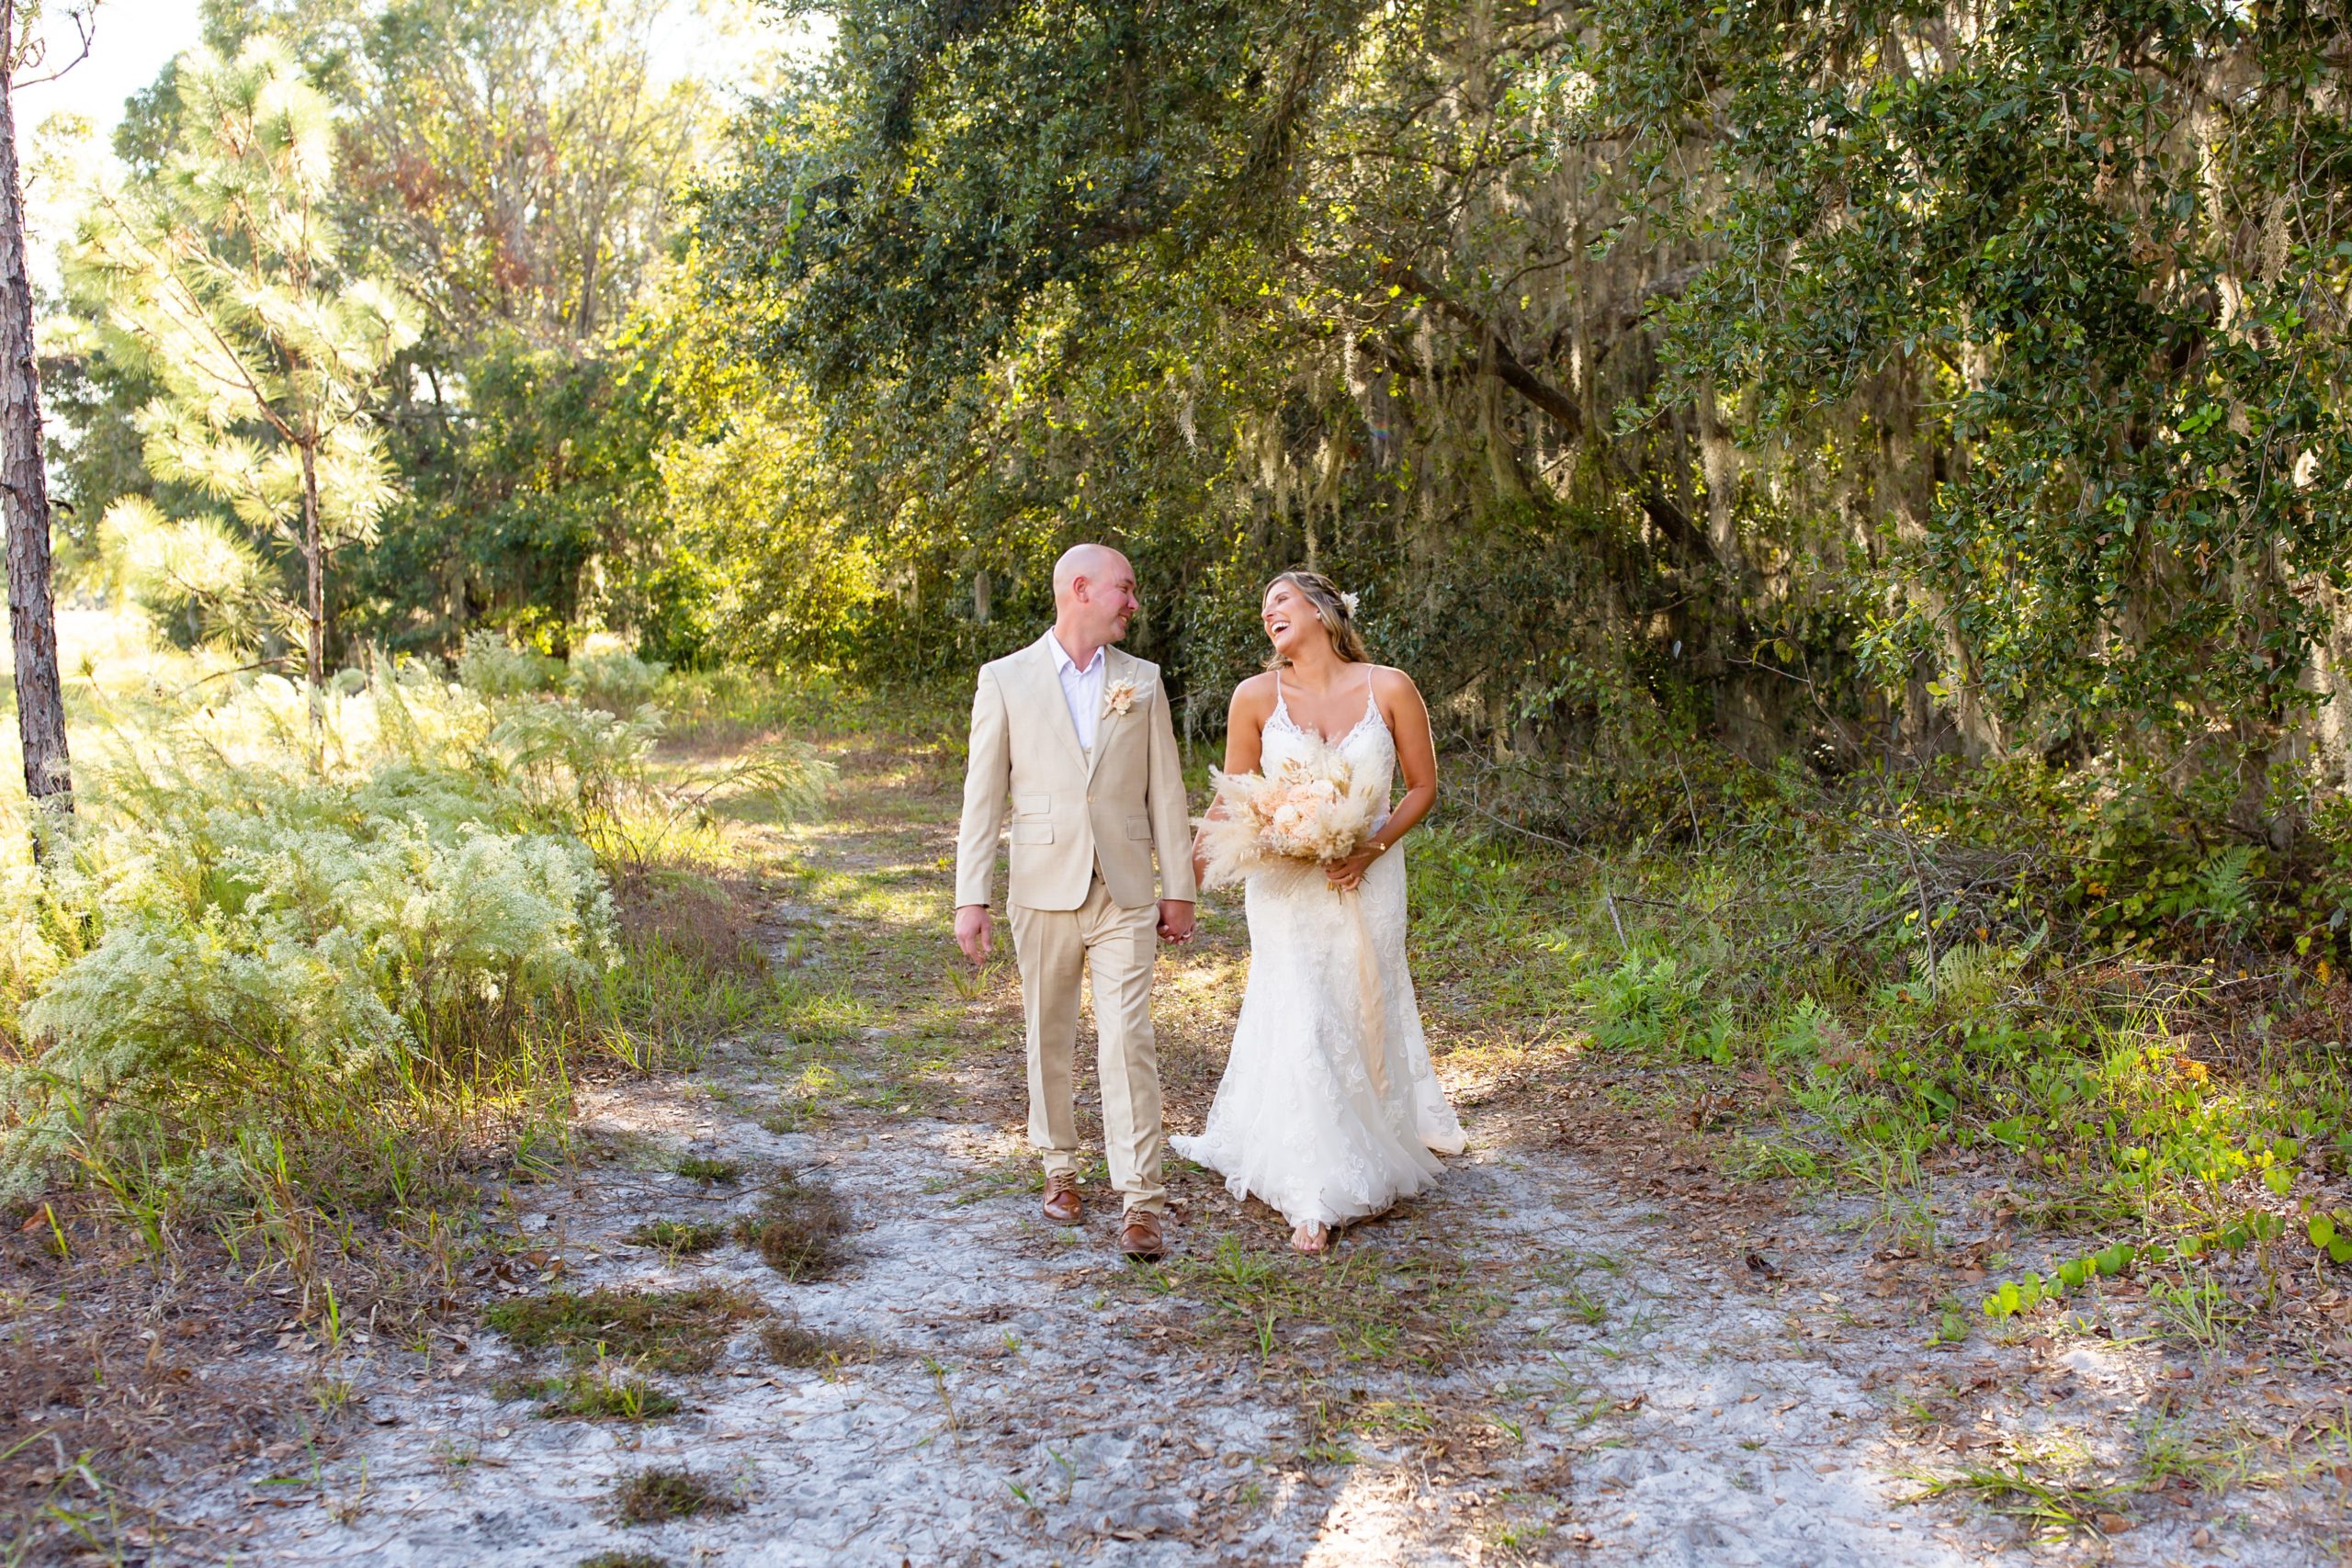 Lake Louisa Wedding Photos in Orlando, FL — Groom and Bride holding a dried floral bridal bouquet walking on path in field with hanging moss